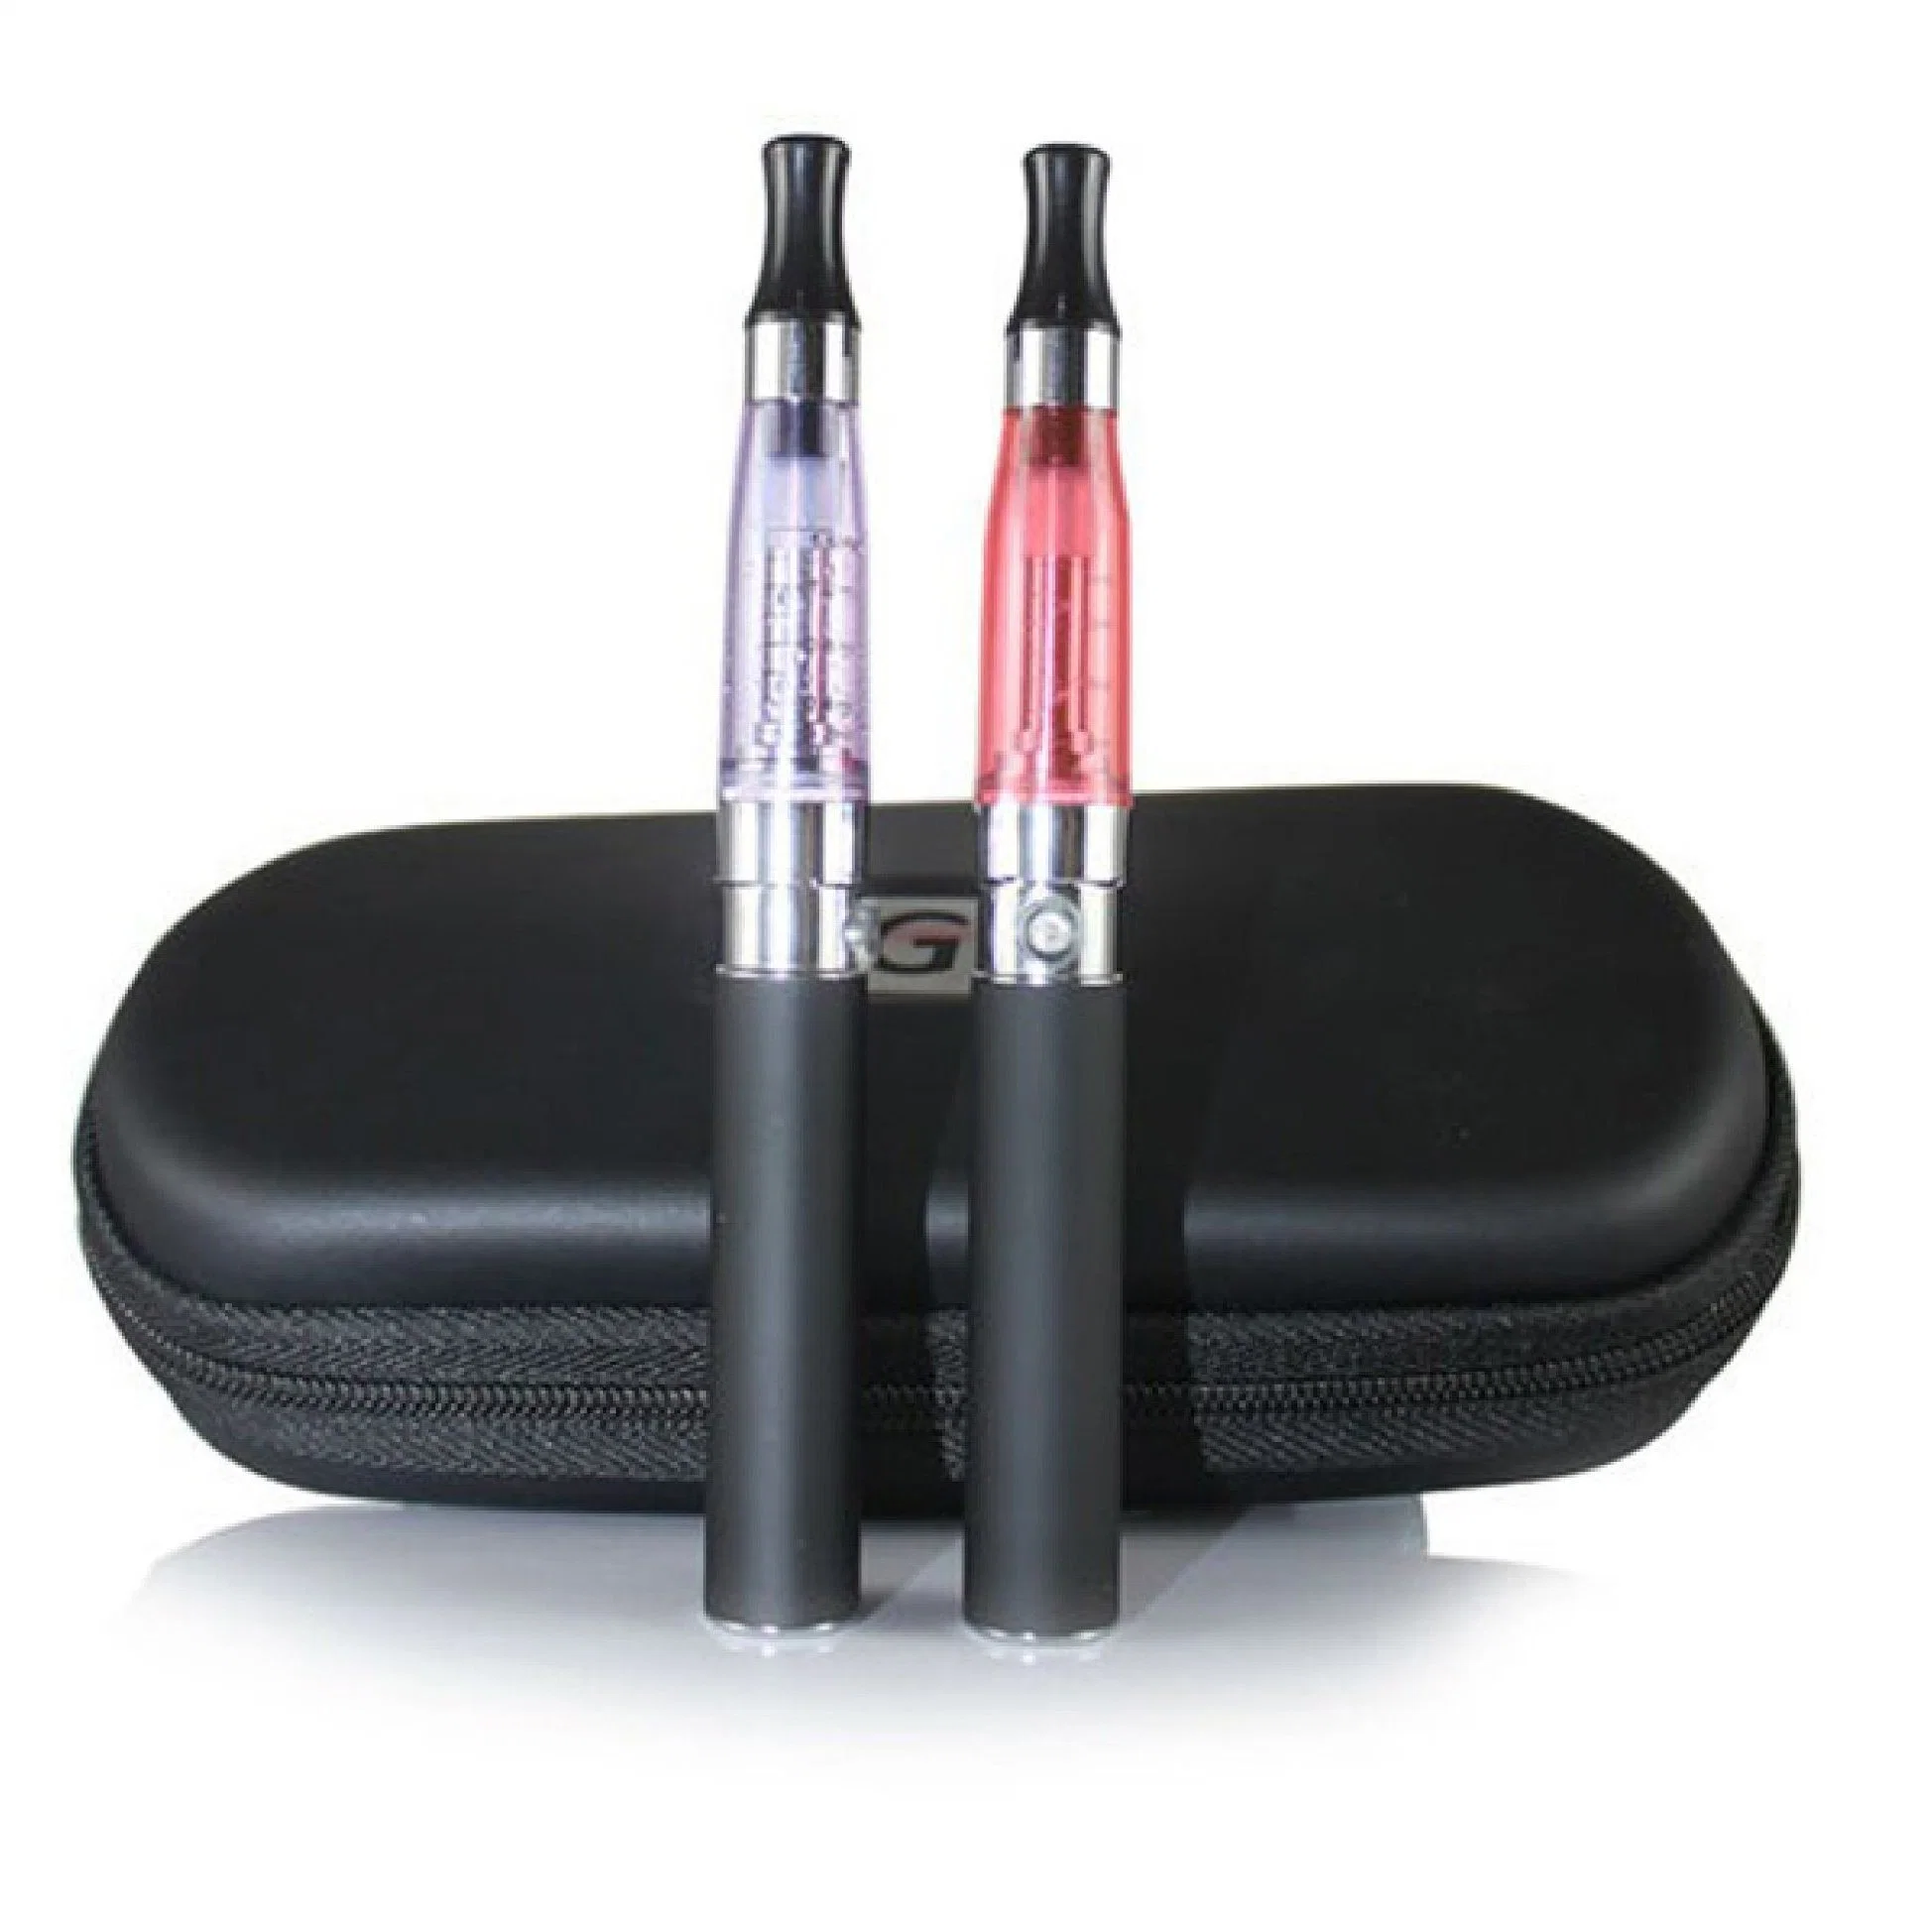 EGO Starter Kits 1100mAh with CE4 Clearomizer and EGO-T Battery Vape Pen